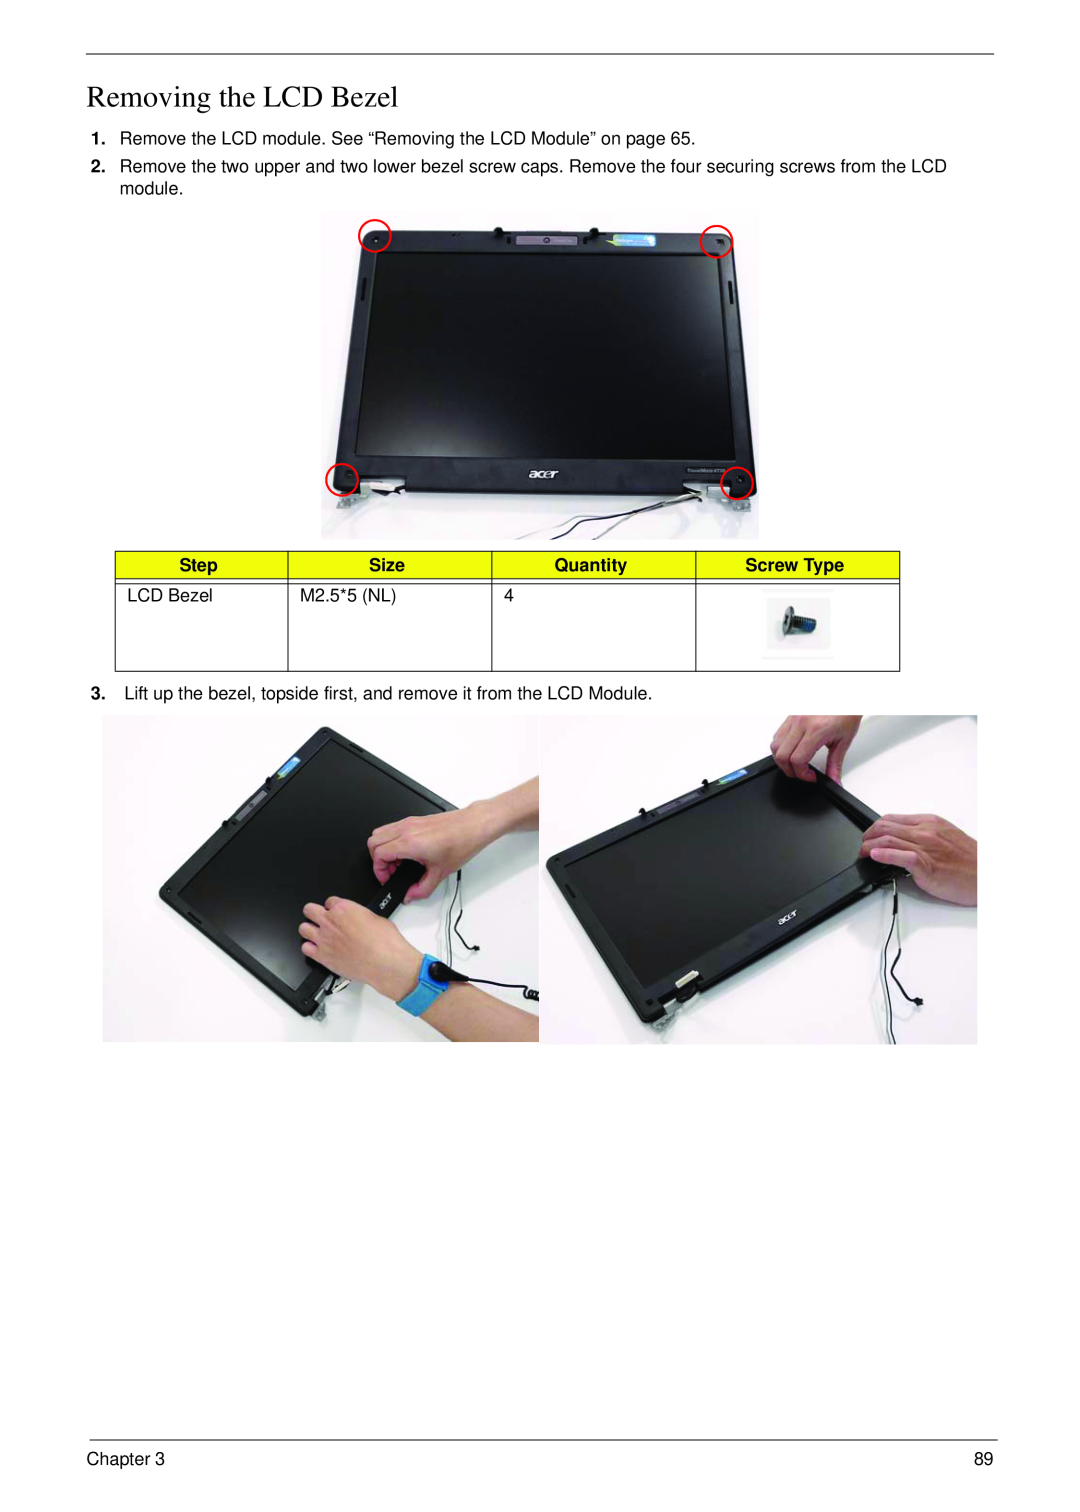 Acer 4730 manual Removing the LCD Bezel, Step, Size, Quantity, Screw Type, M2.5*5 NL 